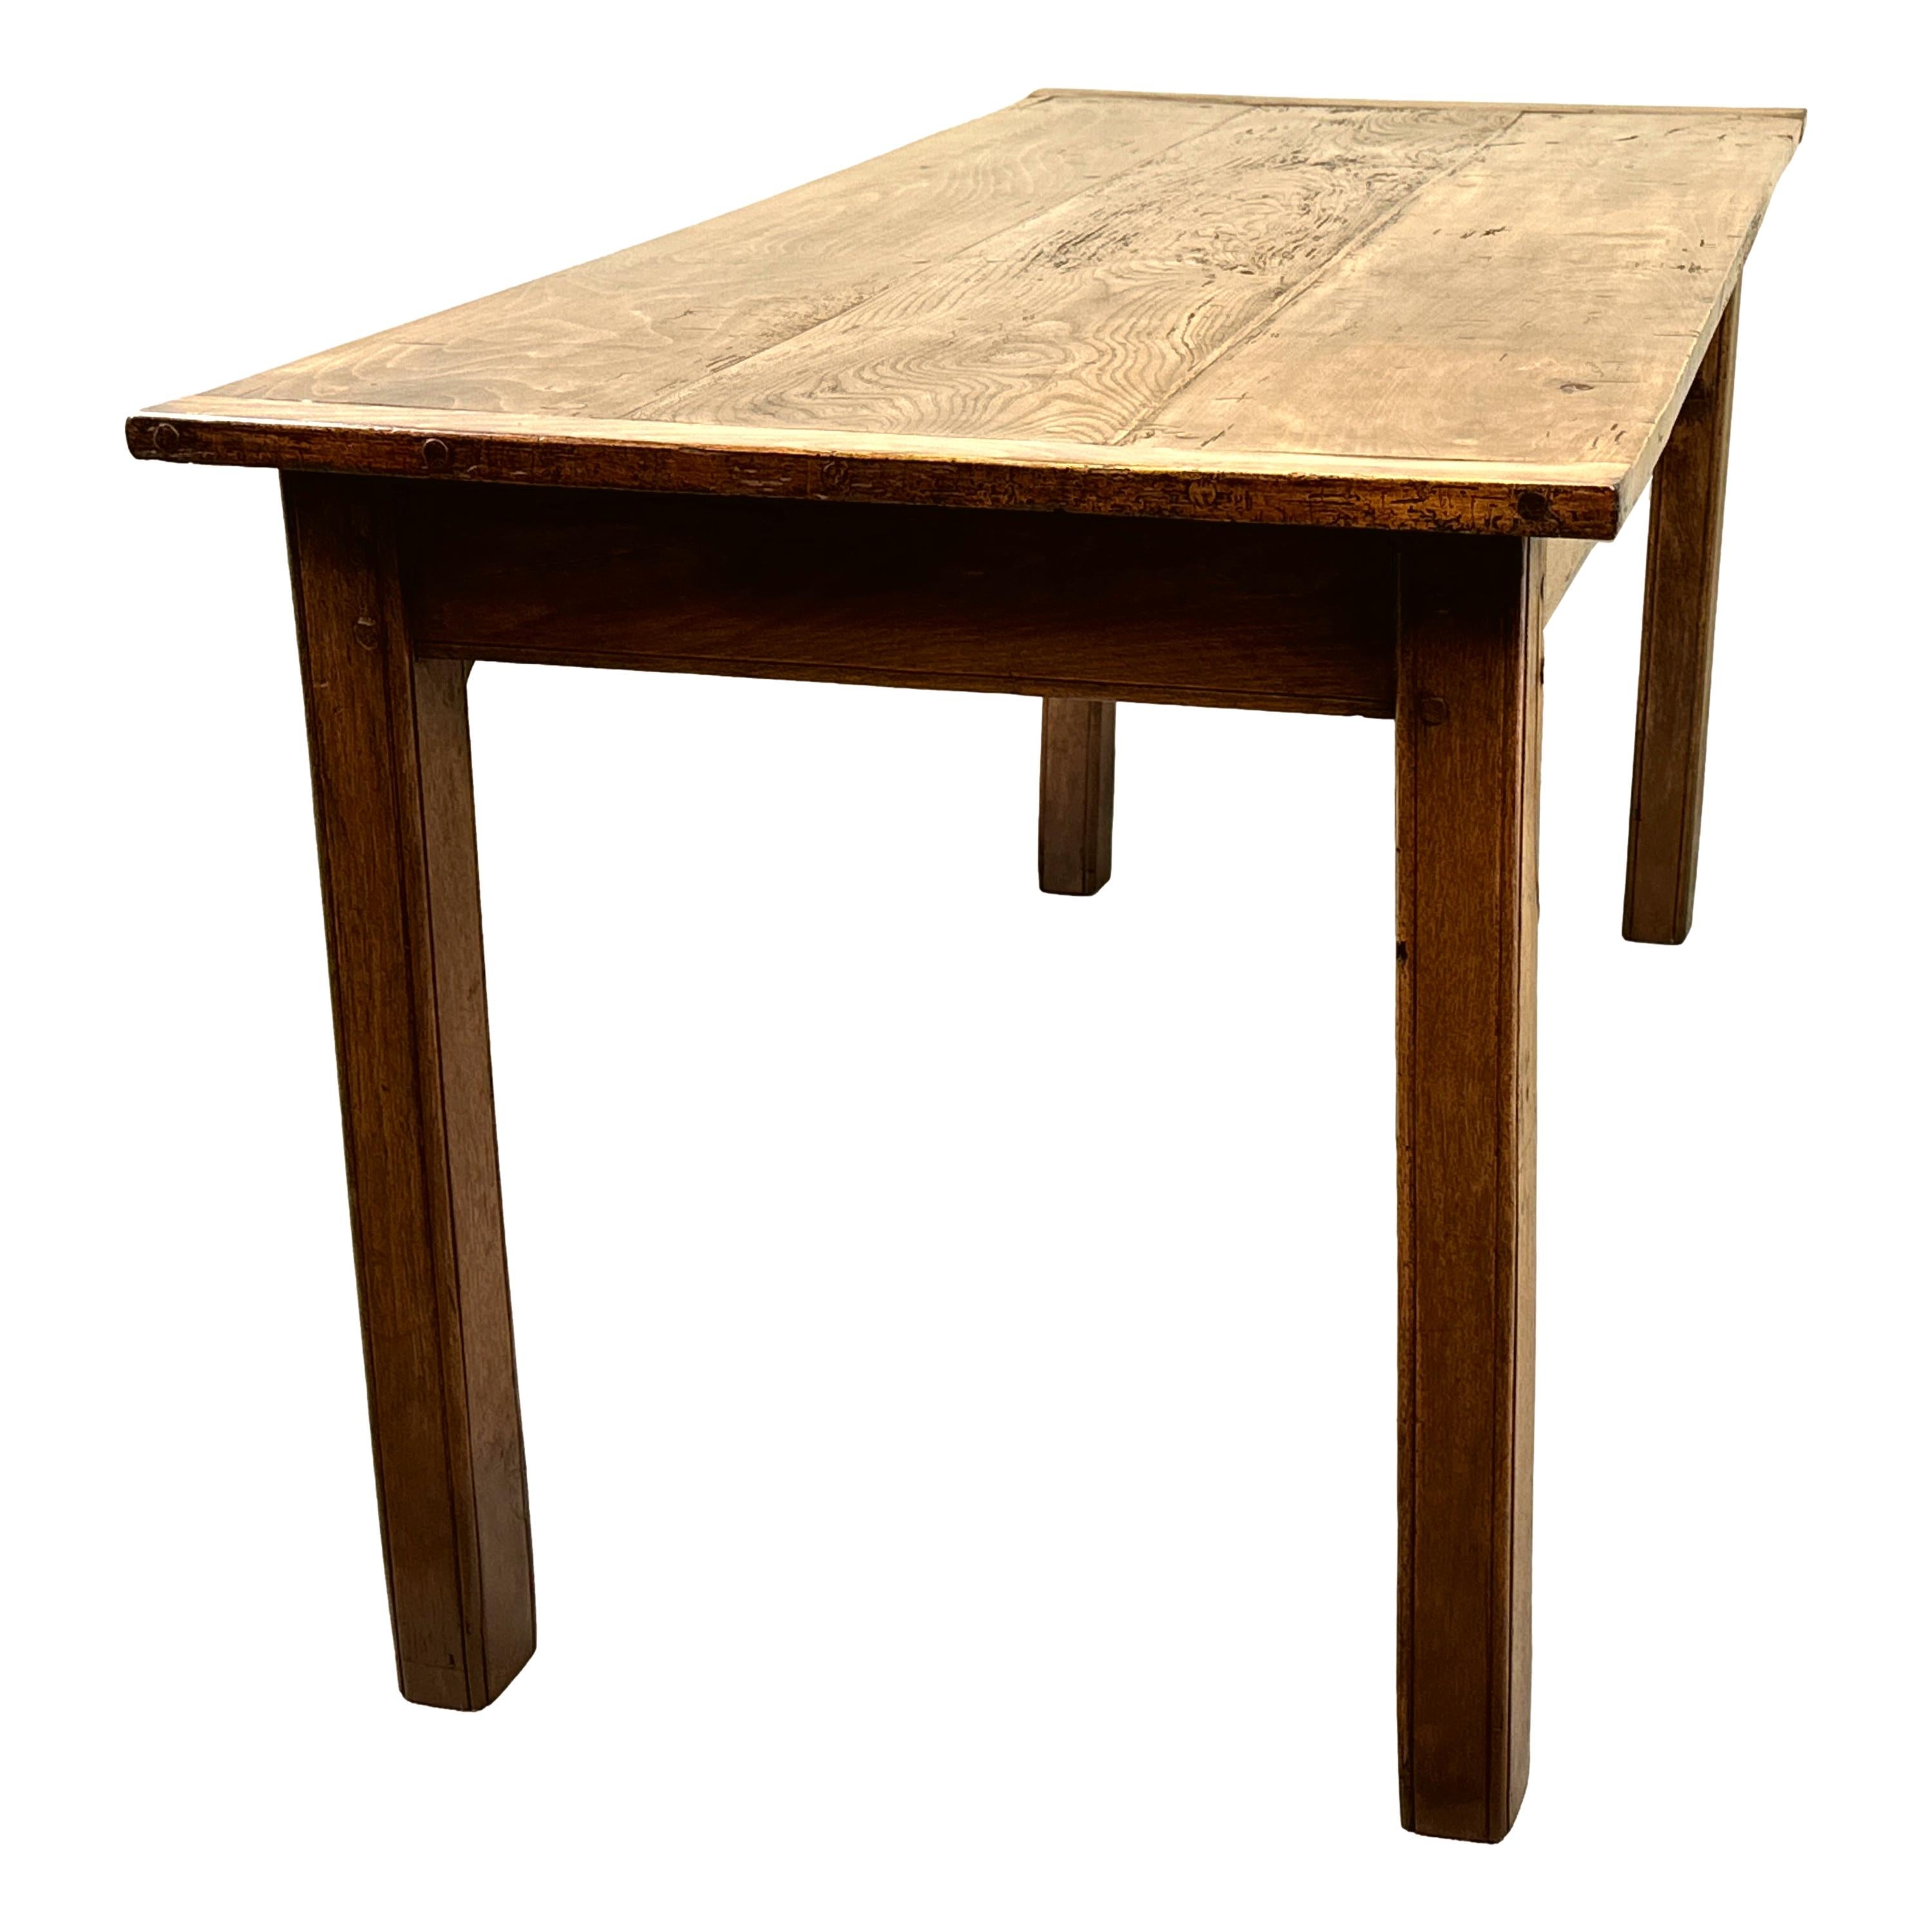 A Very Attractive Mid 19th Century Oak, Beech And Elm French Farmhouse Kitchen Dining Table, Having Well Figured Plank Top With Cleated Ends, Over One Drawer To Elegant Frieze, Raised On Bold Square Legs.


This is a both charming and practical